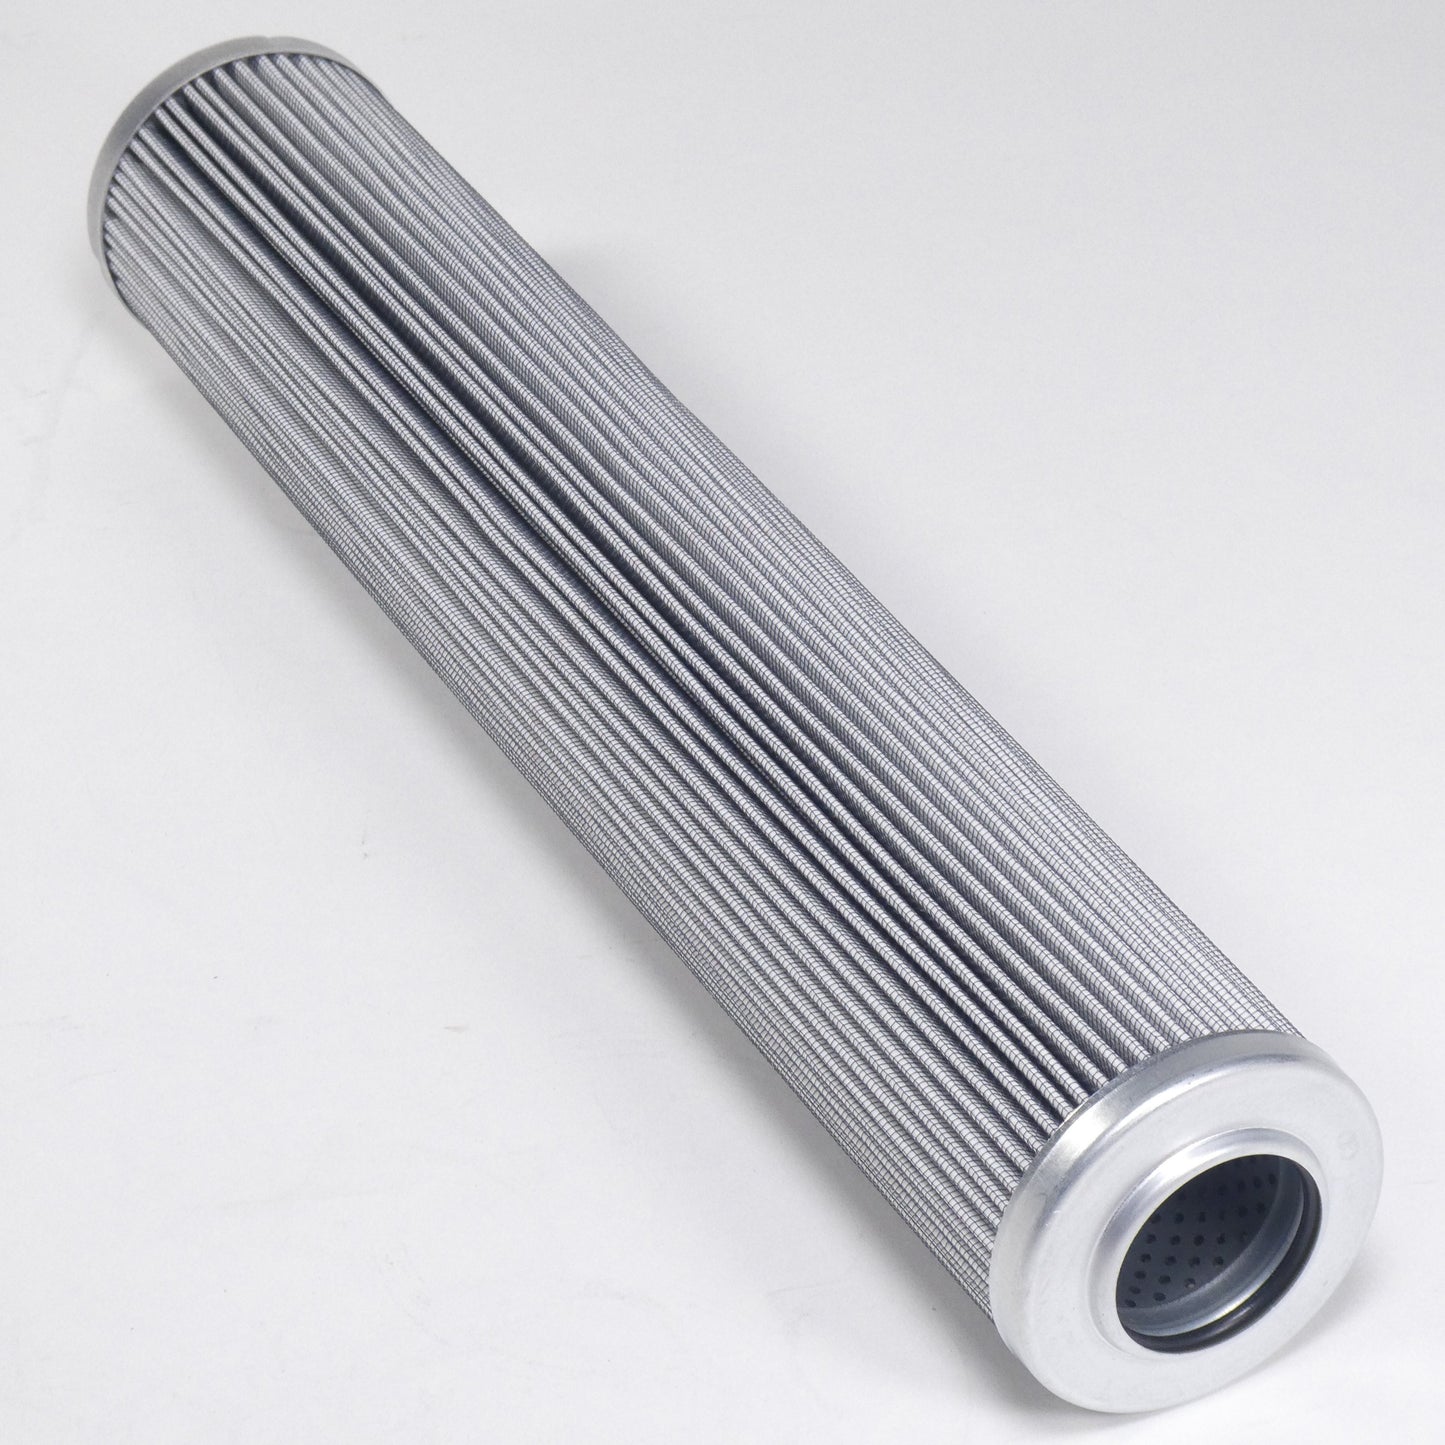 Hydrafil Replacement Filter Element for Pall AC9600FUT16H